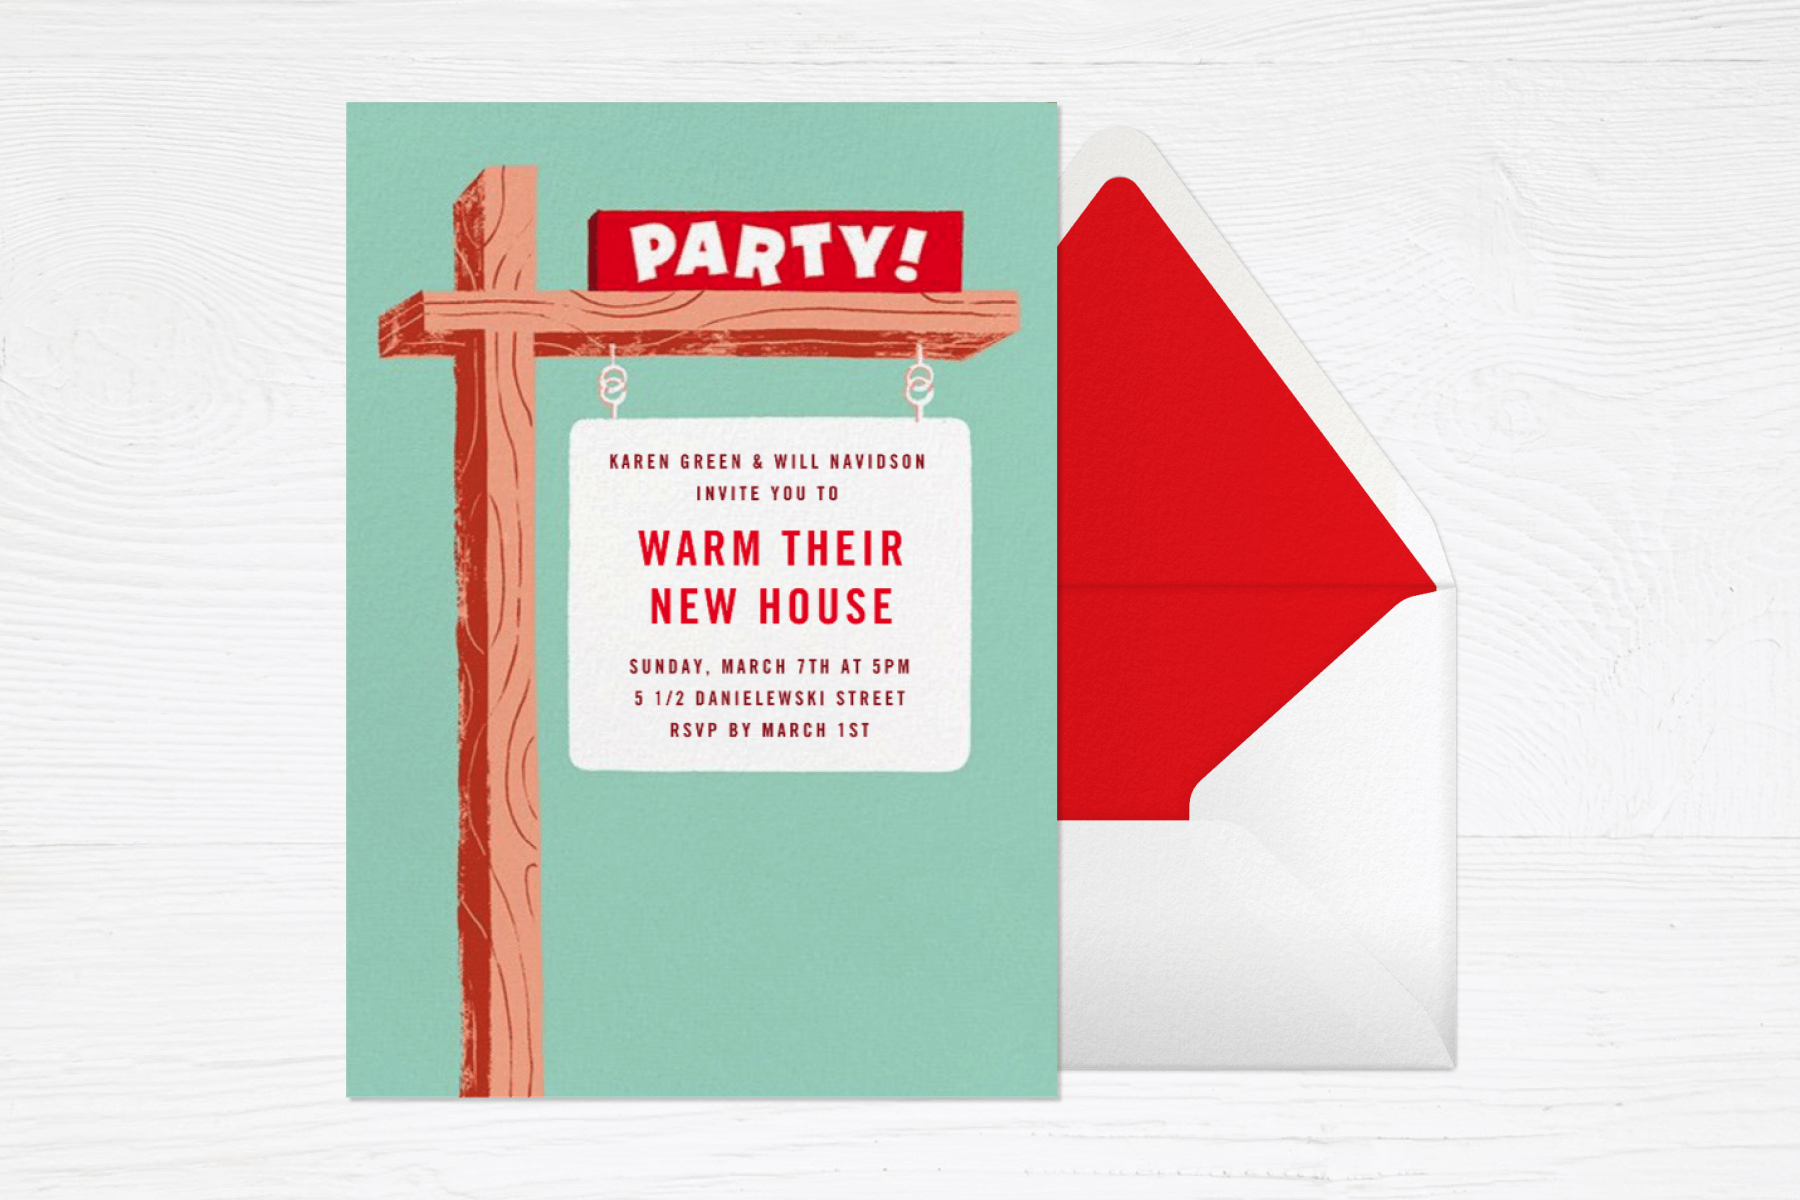 A green housewarming party invitation on a white wood backdrop with a red-lined envelope resembles a “sold” sign in front of a house with the words “warm their new house” on the hanging sign.